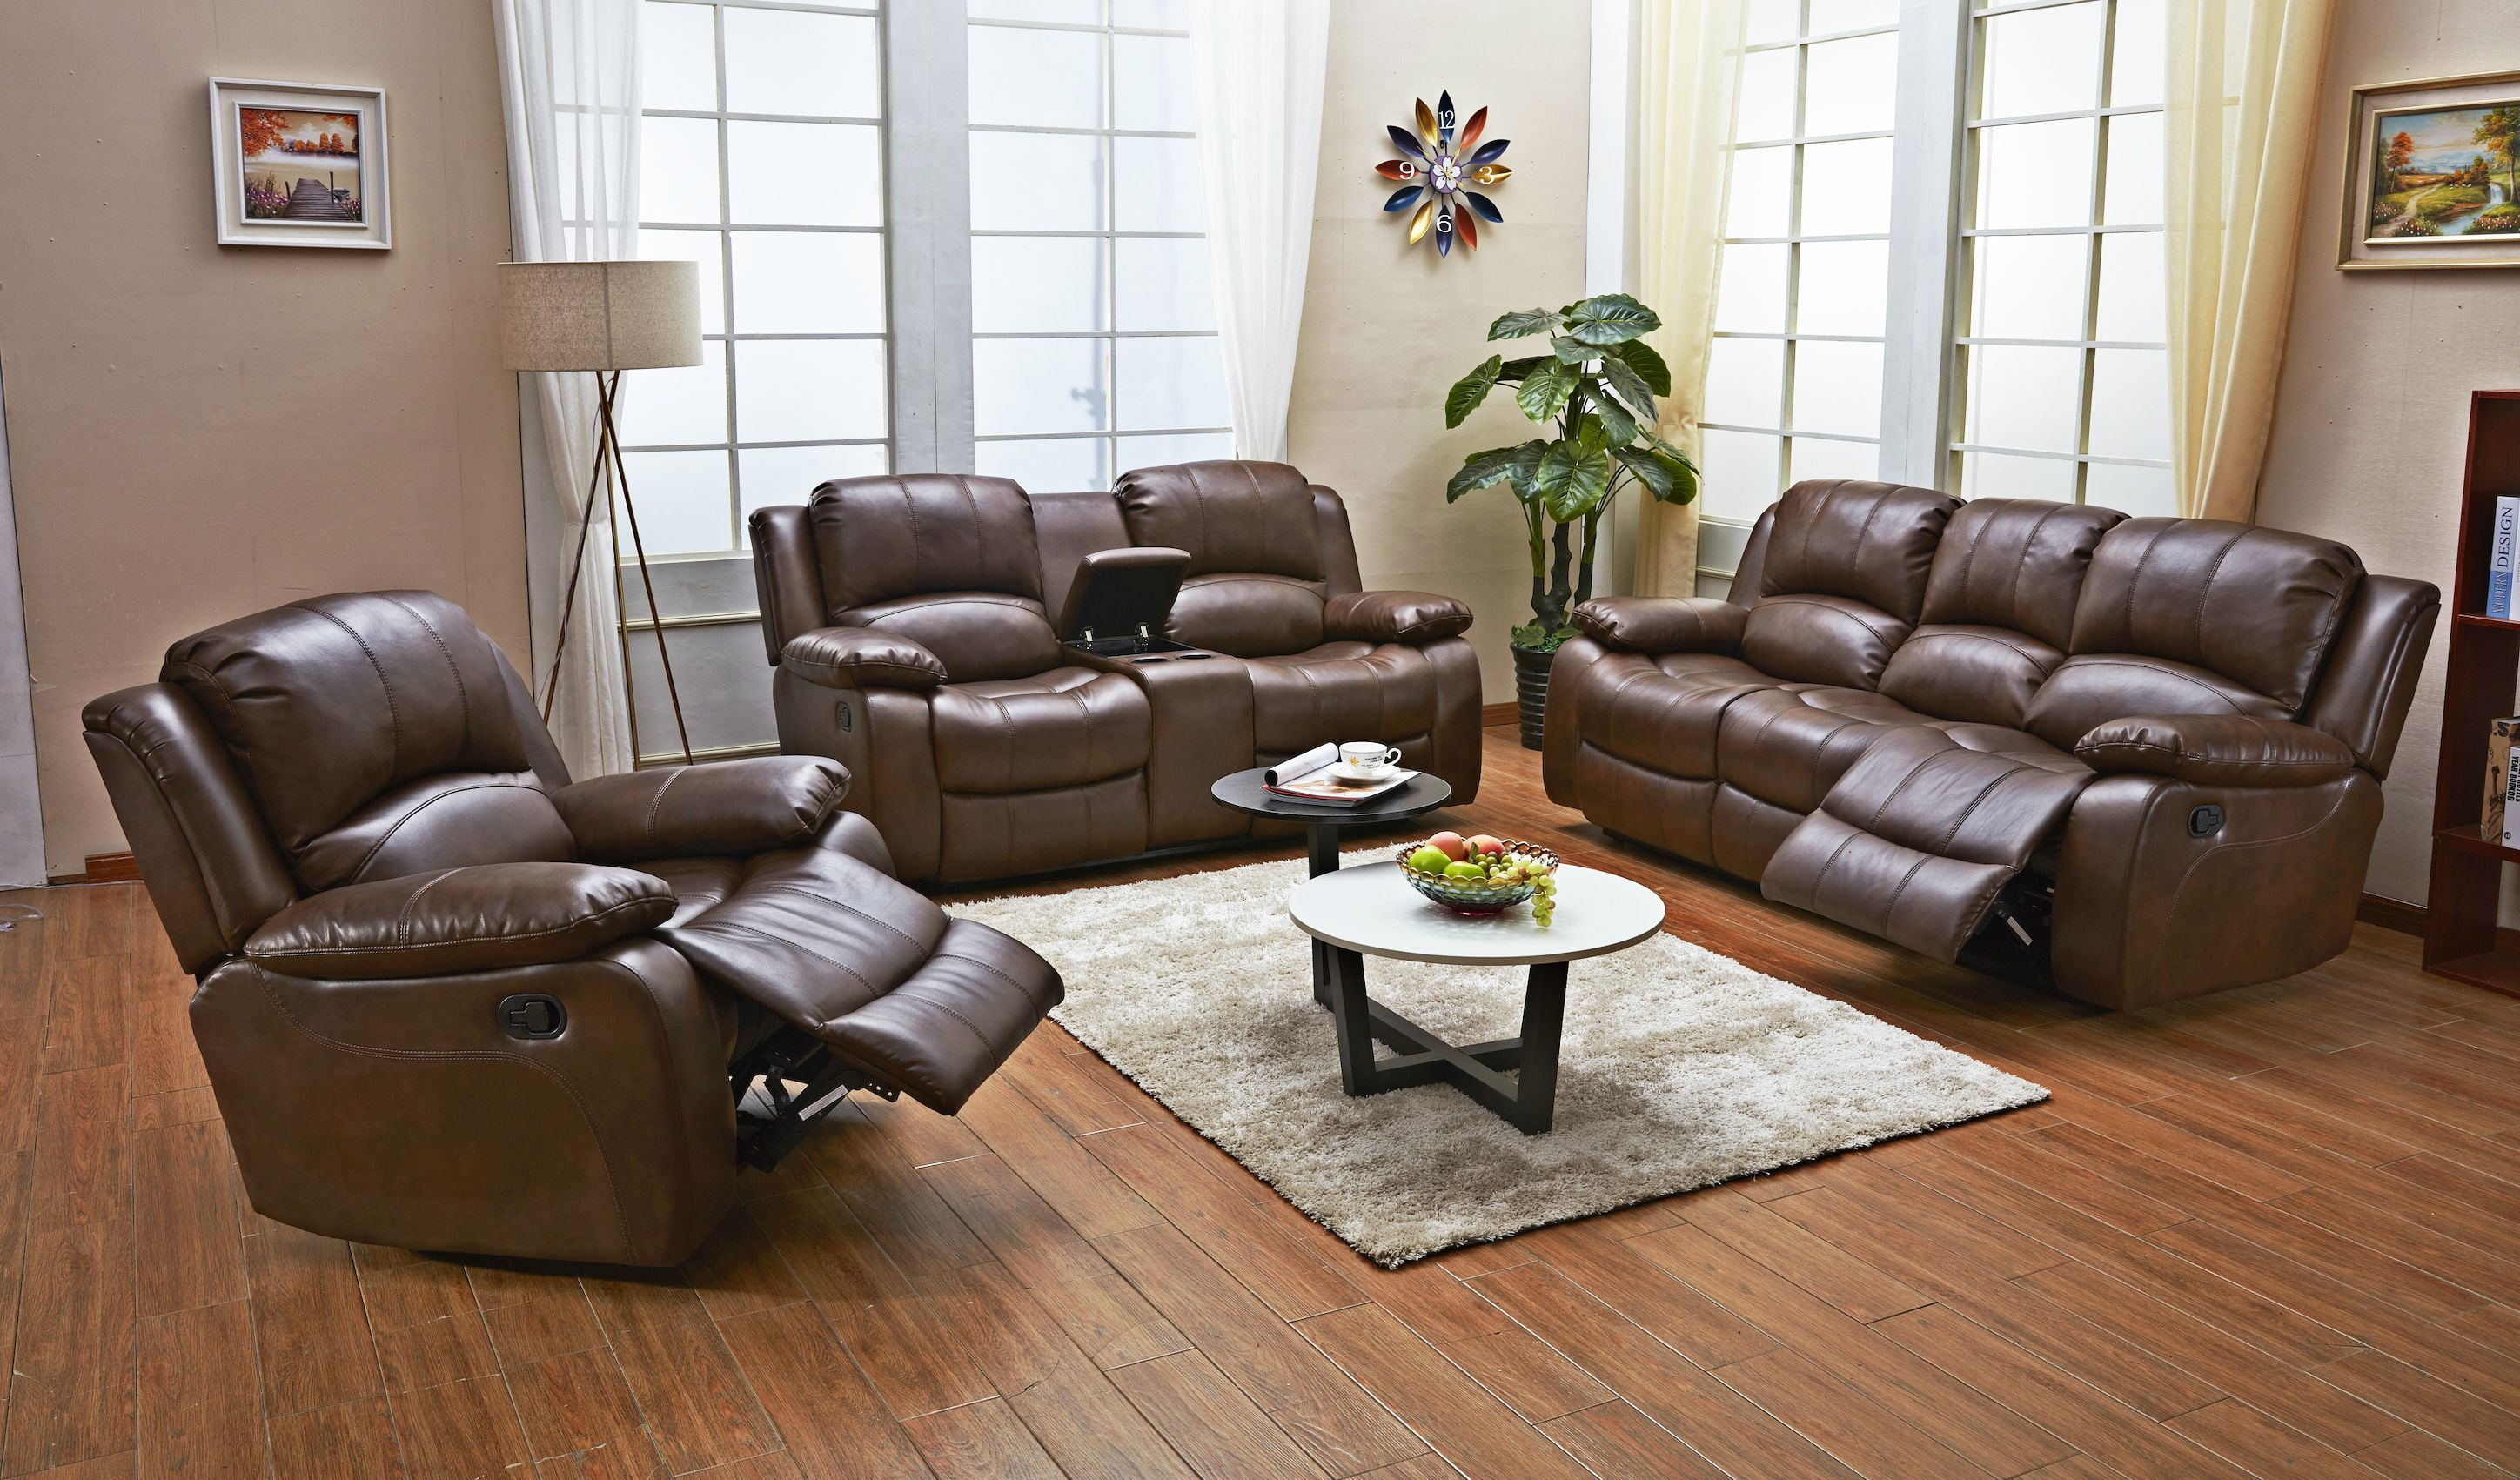 B Furniture Bonded Leather, Leather Couch Loveseat Recliner Set